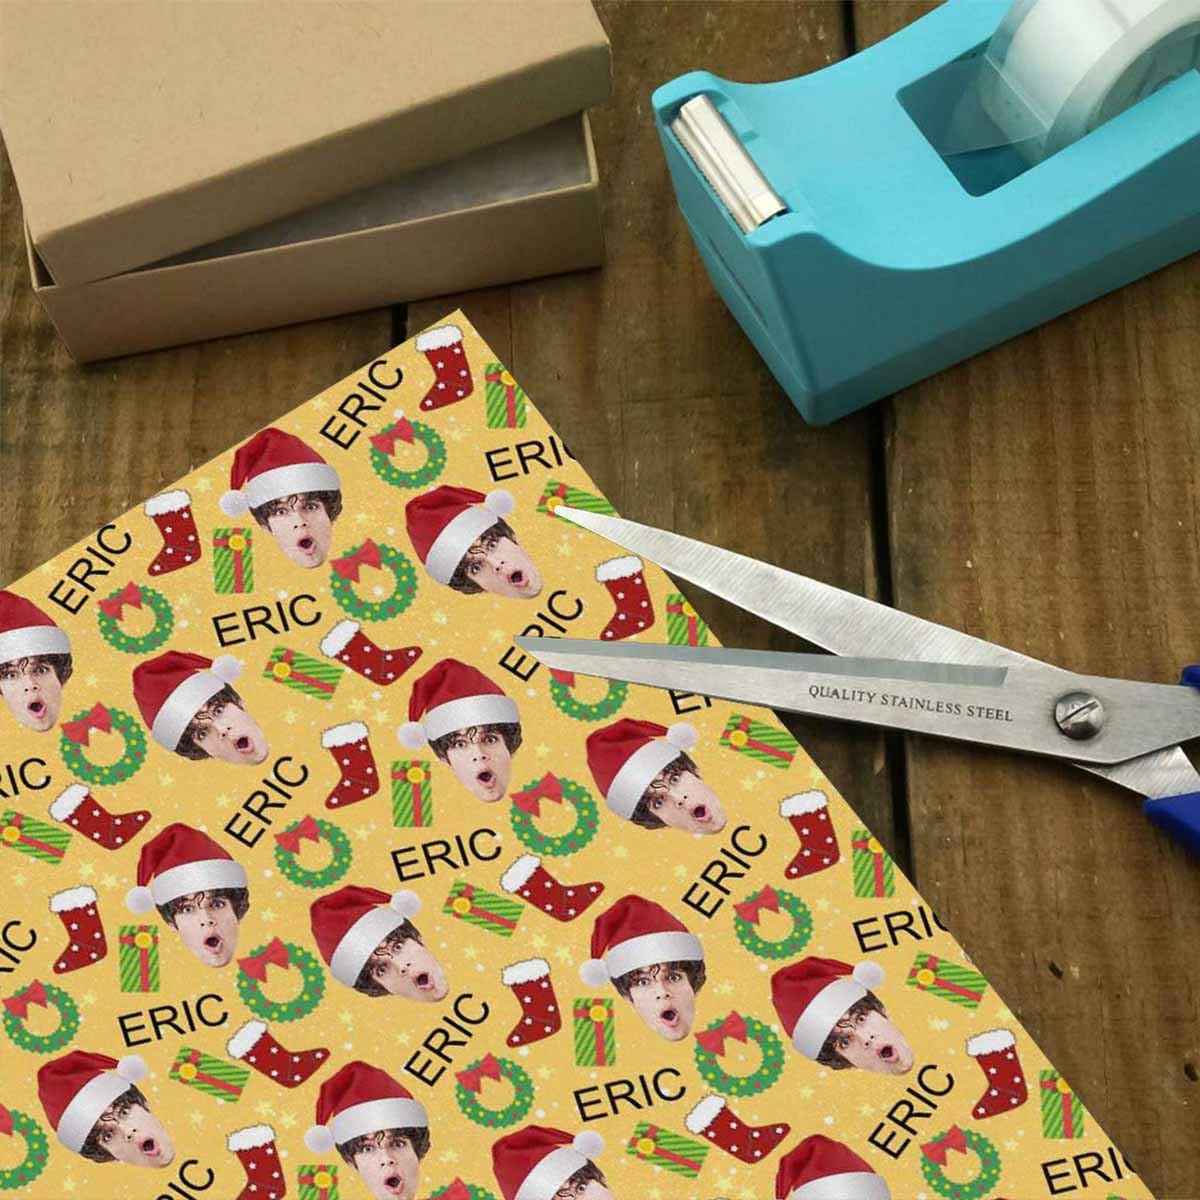 Jaydouble Custom Christmas Wrapping Paper Personalized Wrap Paper with Names And Photos For Adults Kids Boys Girls Friends Couples,Merry Christmas Xmas Festive Wrapping Paper 58" x 23